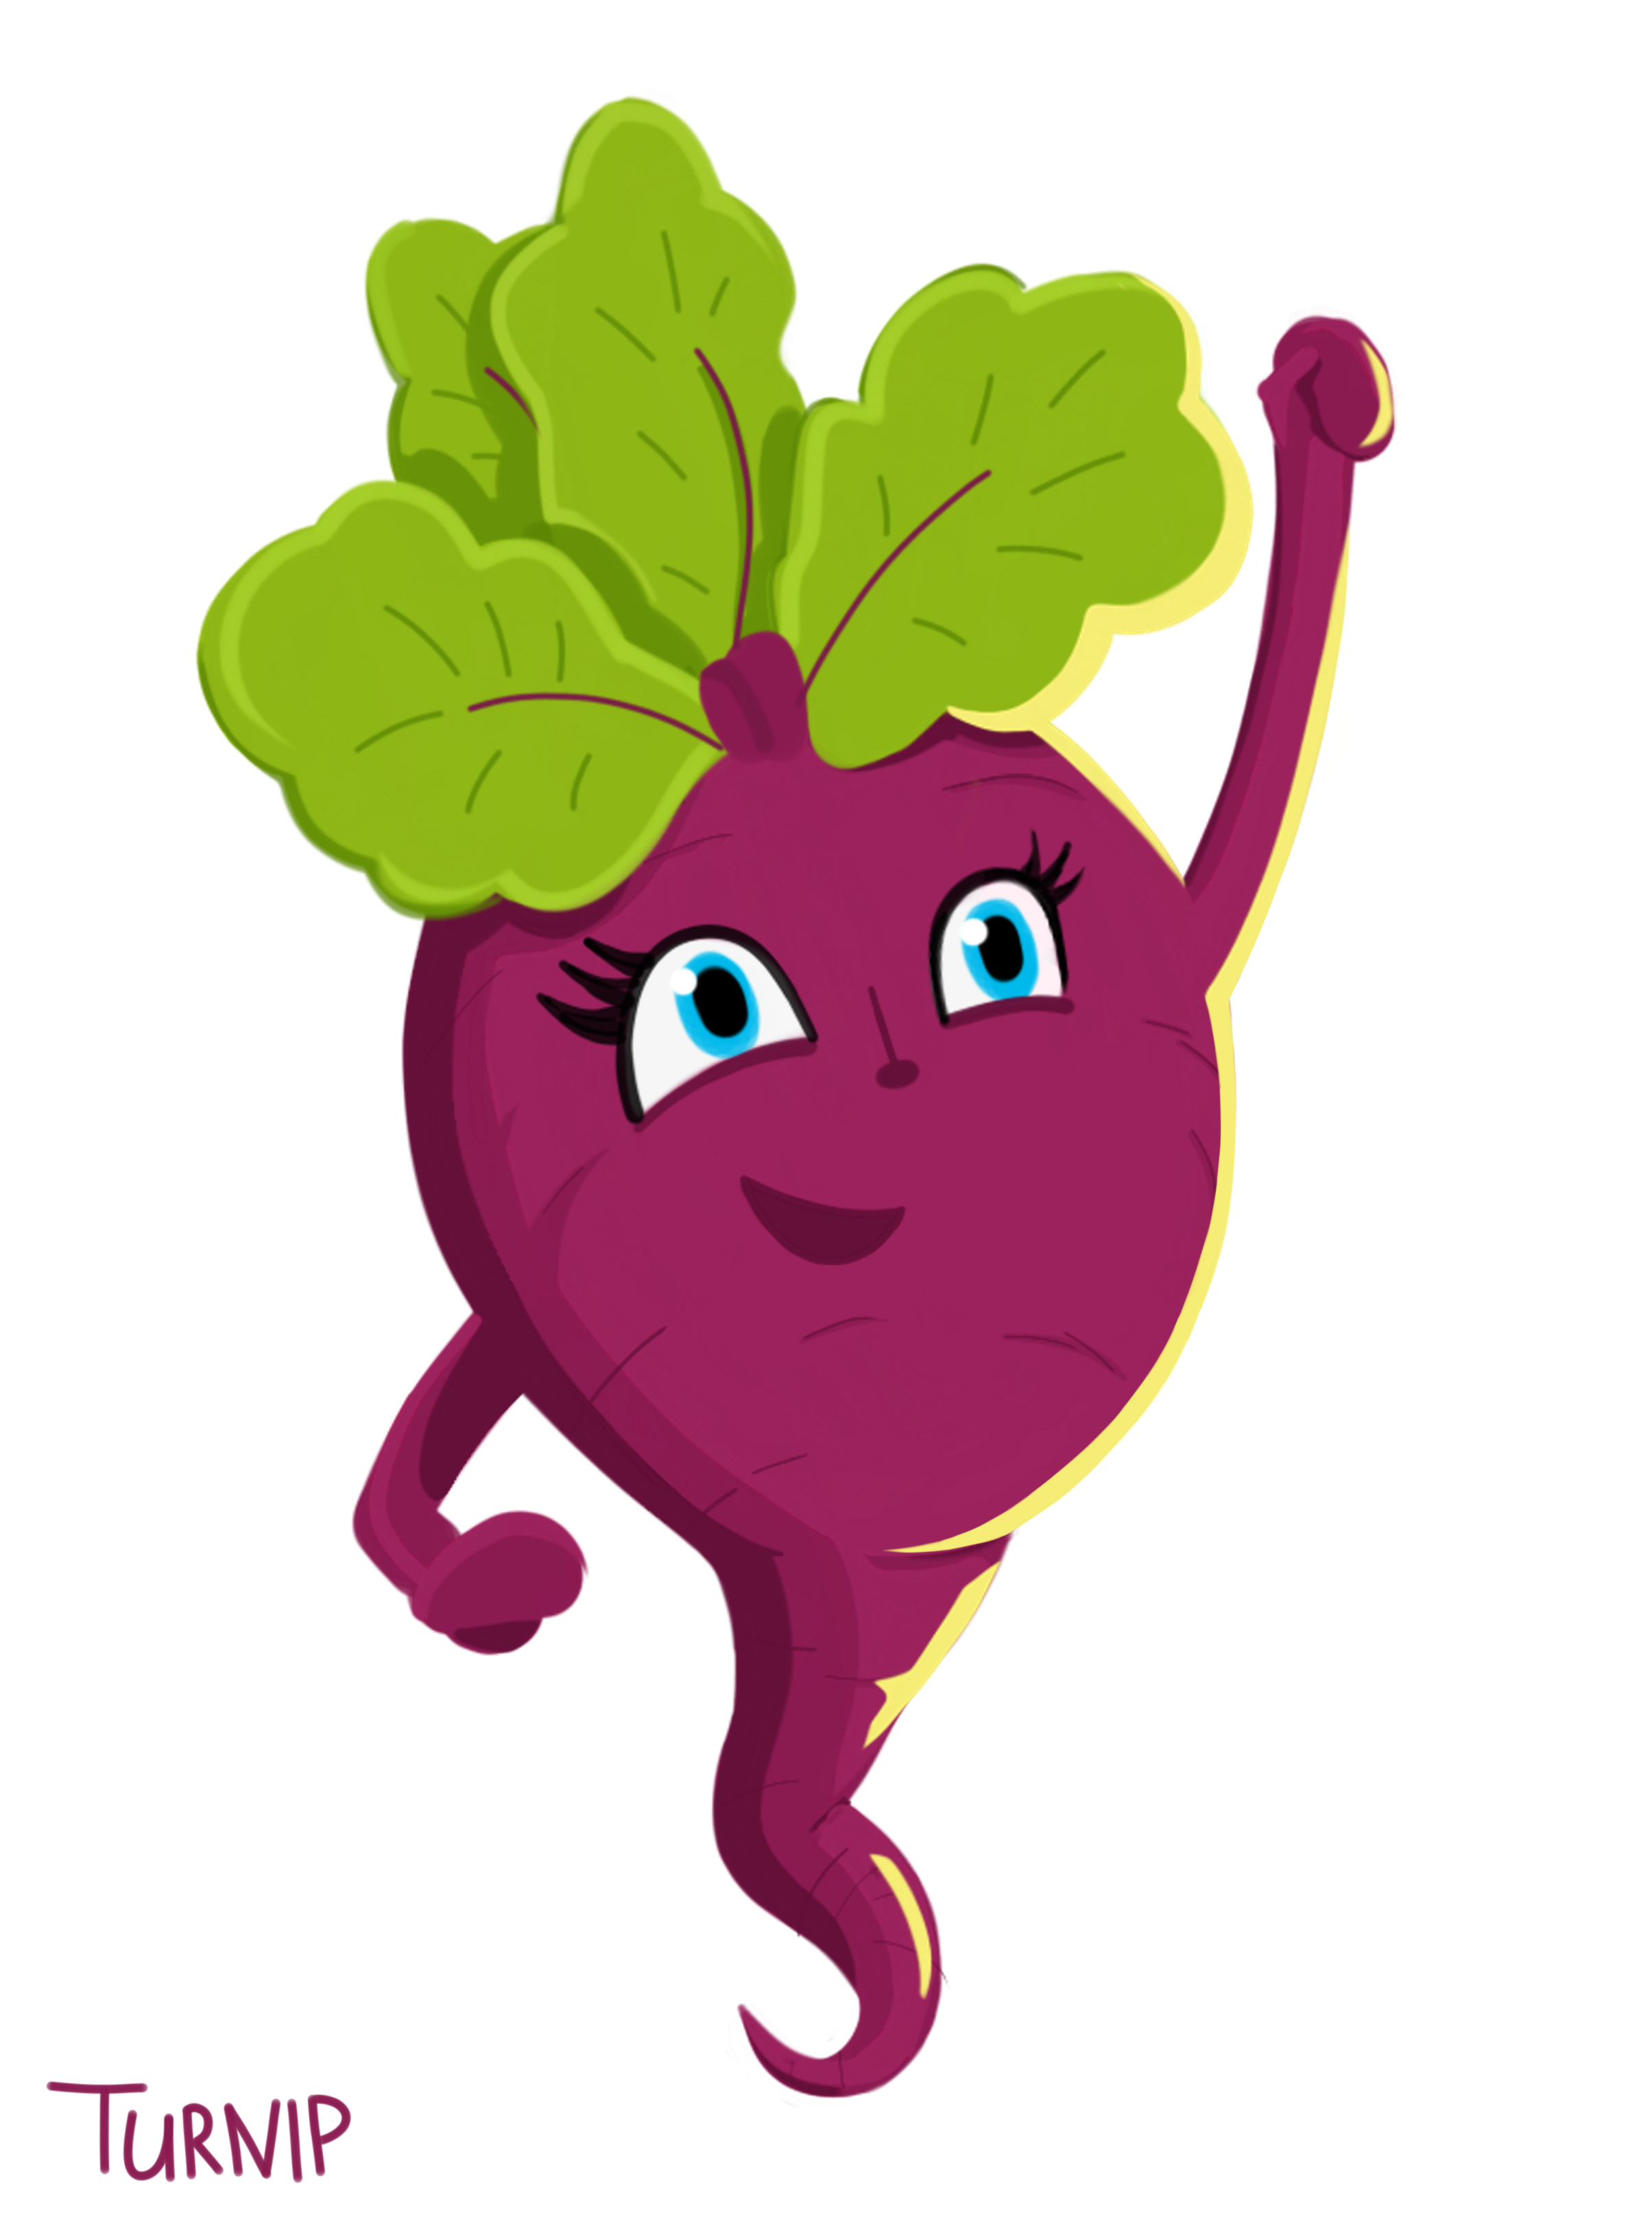 Turnip_Concept_Final3.png